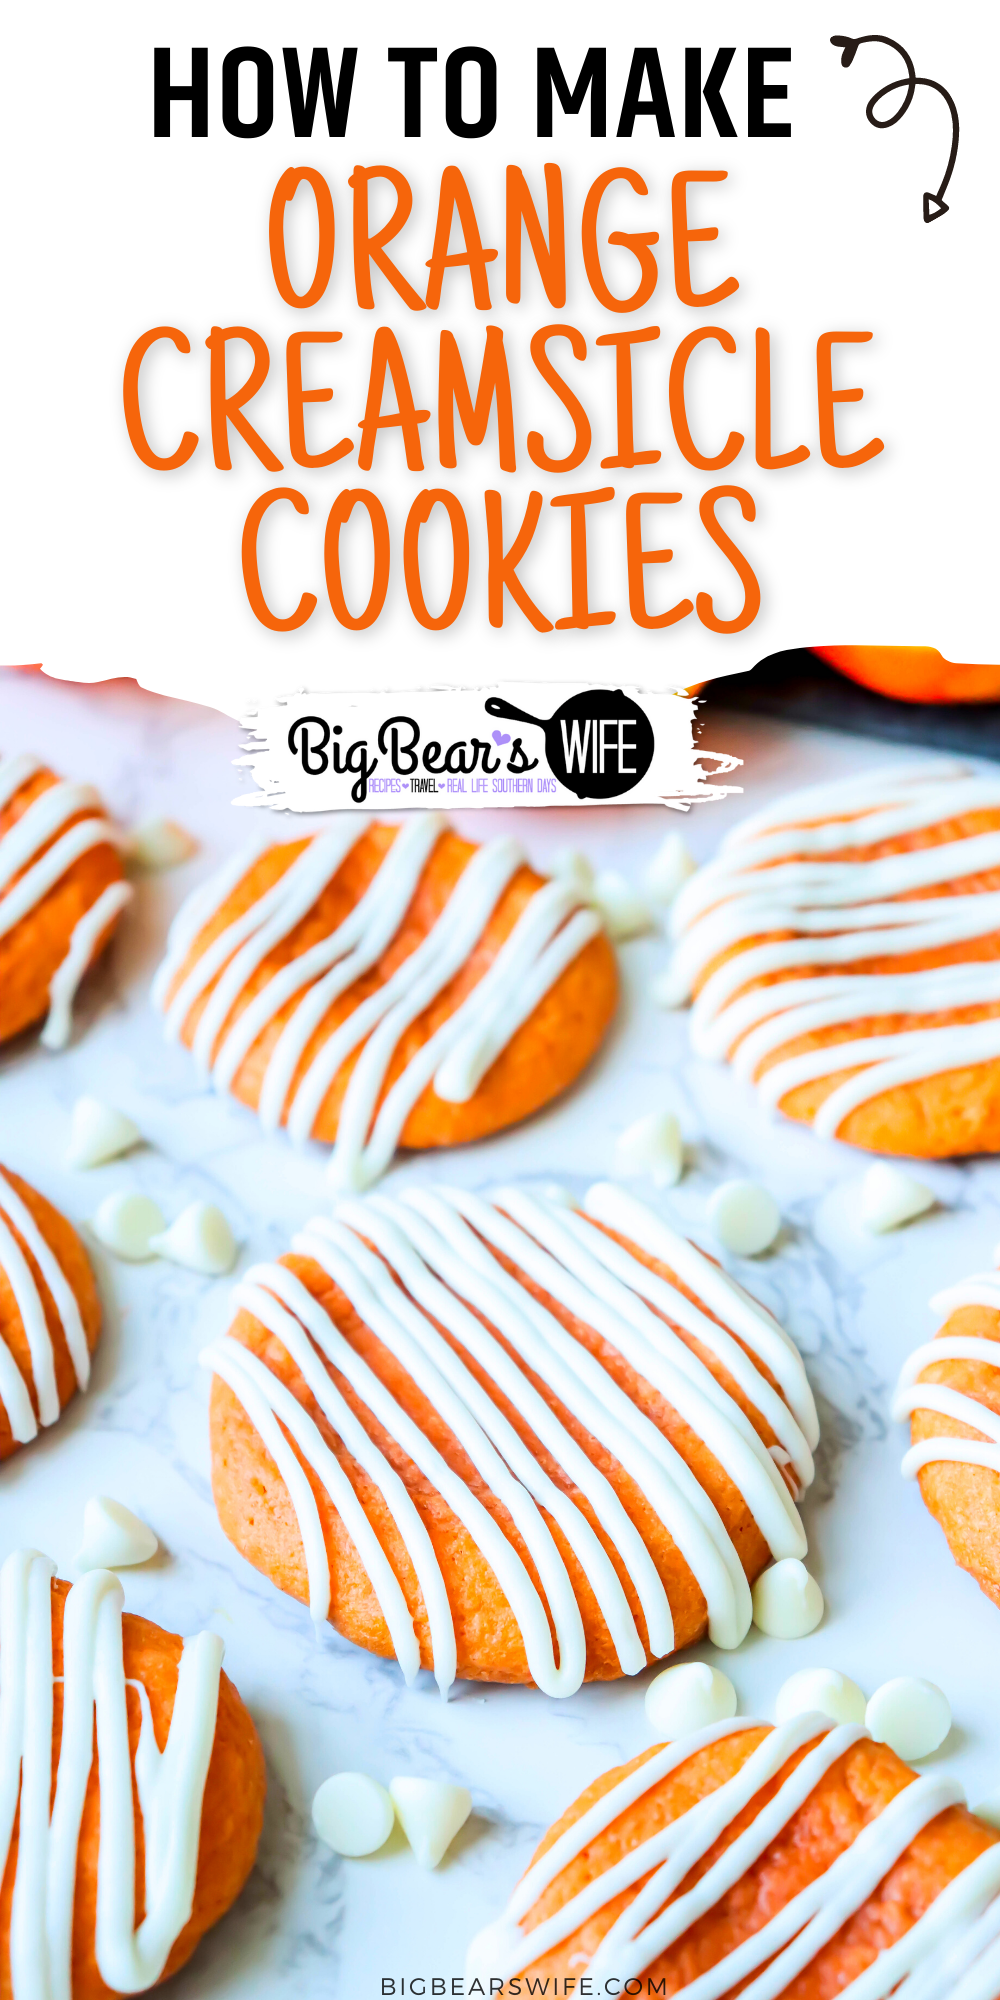 These Orange Creamsicle Cookies are the perfect combination of vanilla and orange! They’re soft, smell just like Orange Creamsicle ice cream and are topped with a white chocolate drizzle! via @bigbearswife